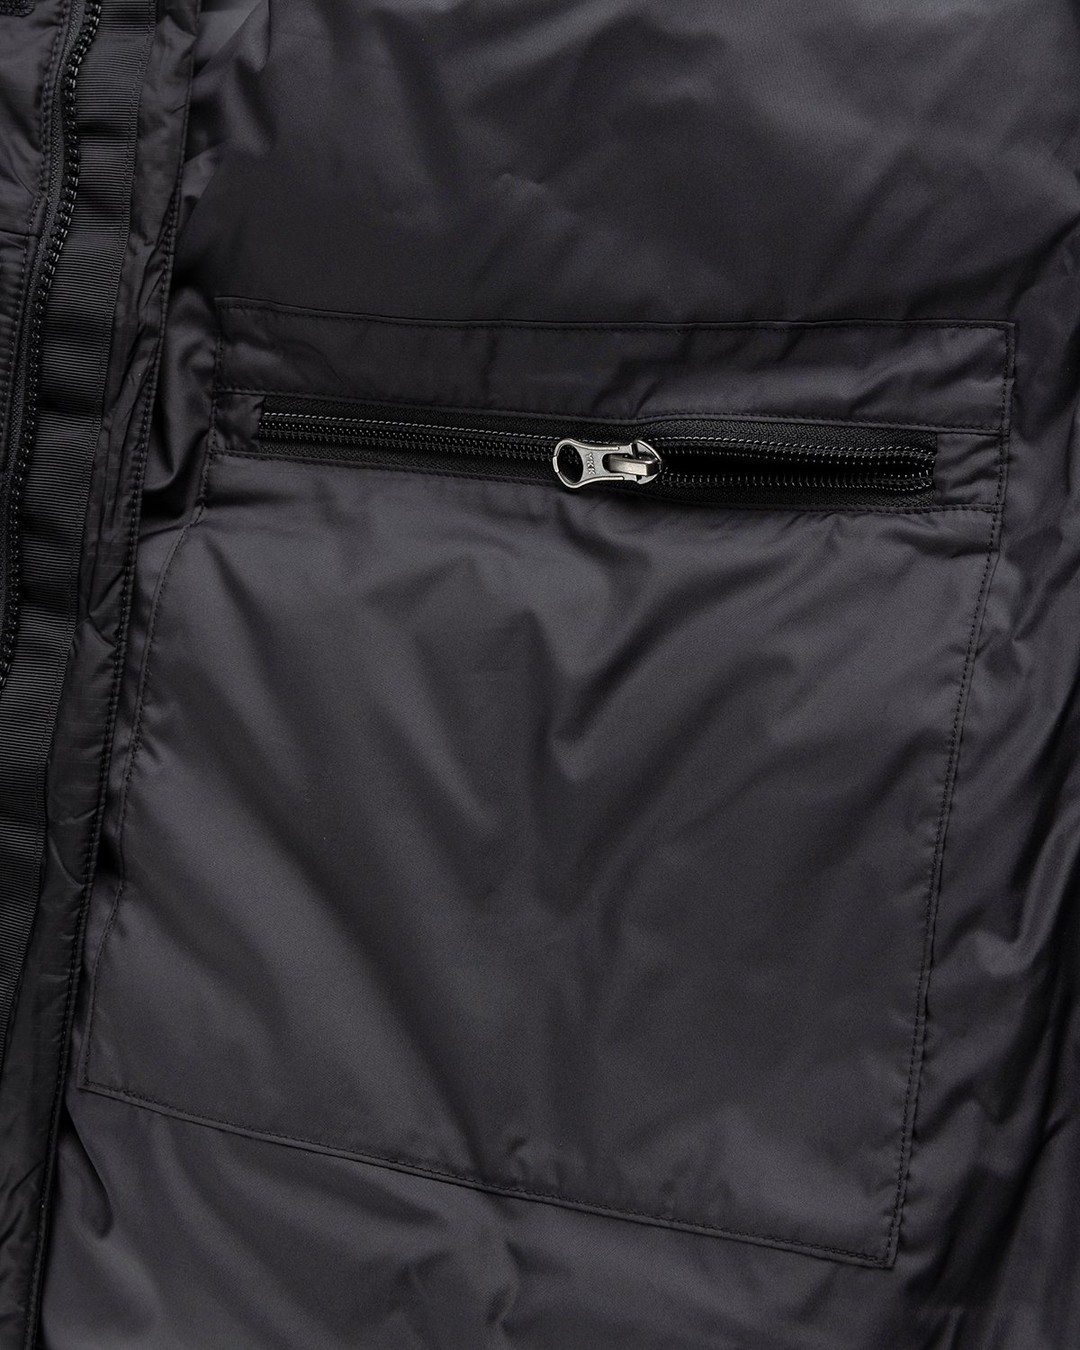 The North Face – Himalayan Down Parka Black - Outerwear - Black - Image 5